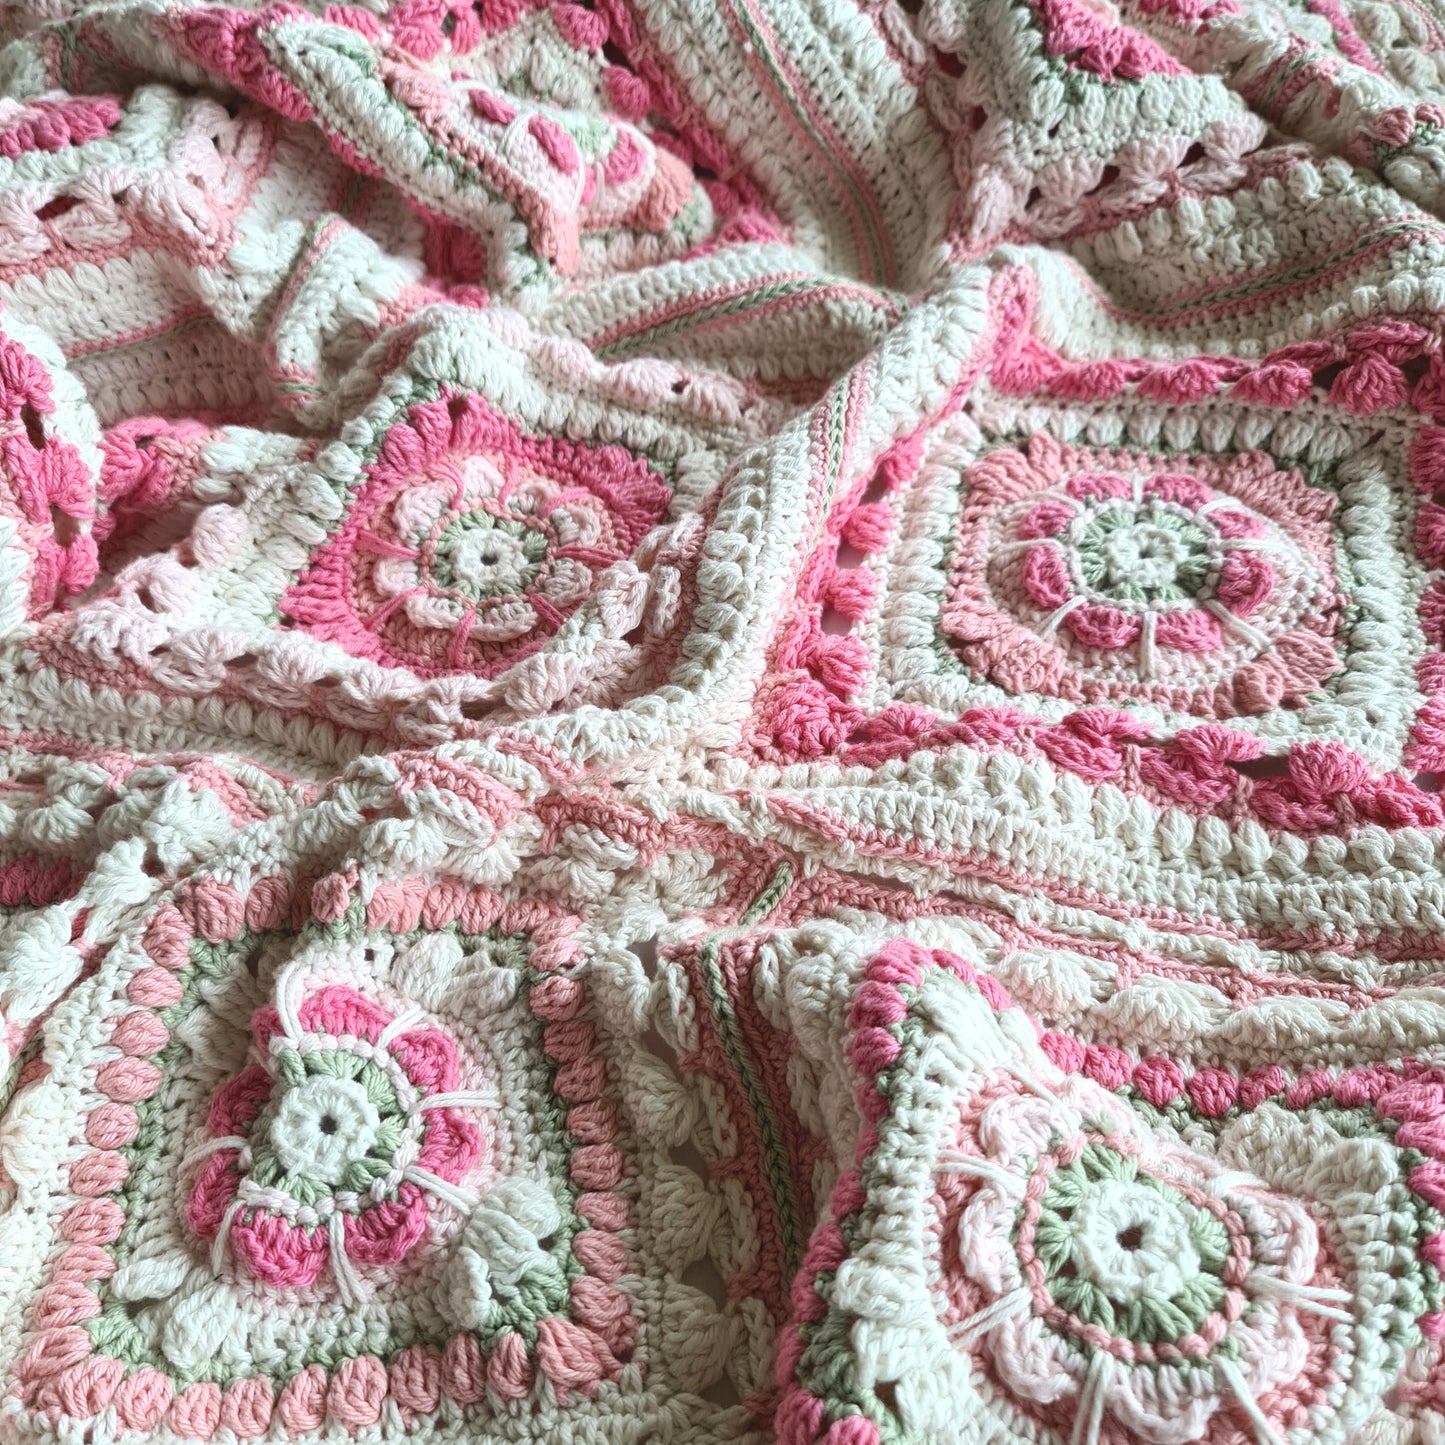 Pink and cream Persnickety Blanket crochet pattern by Shelley Husband